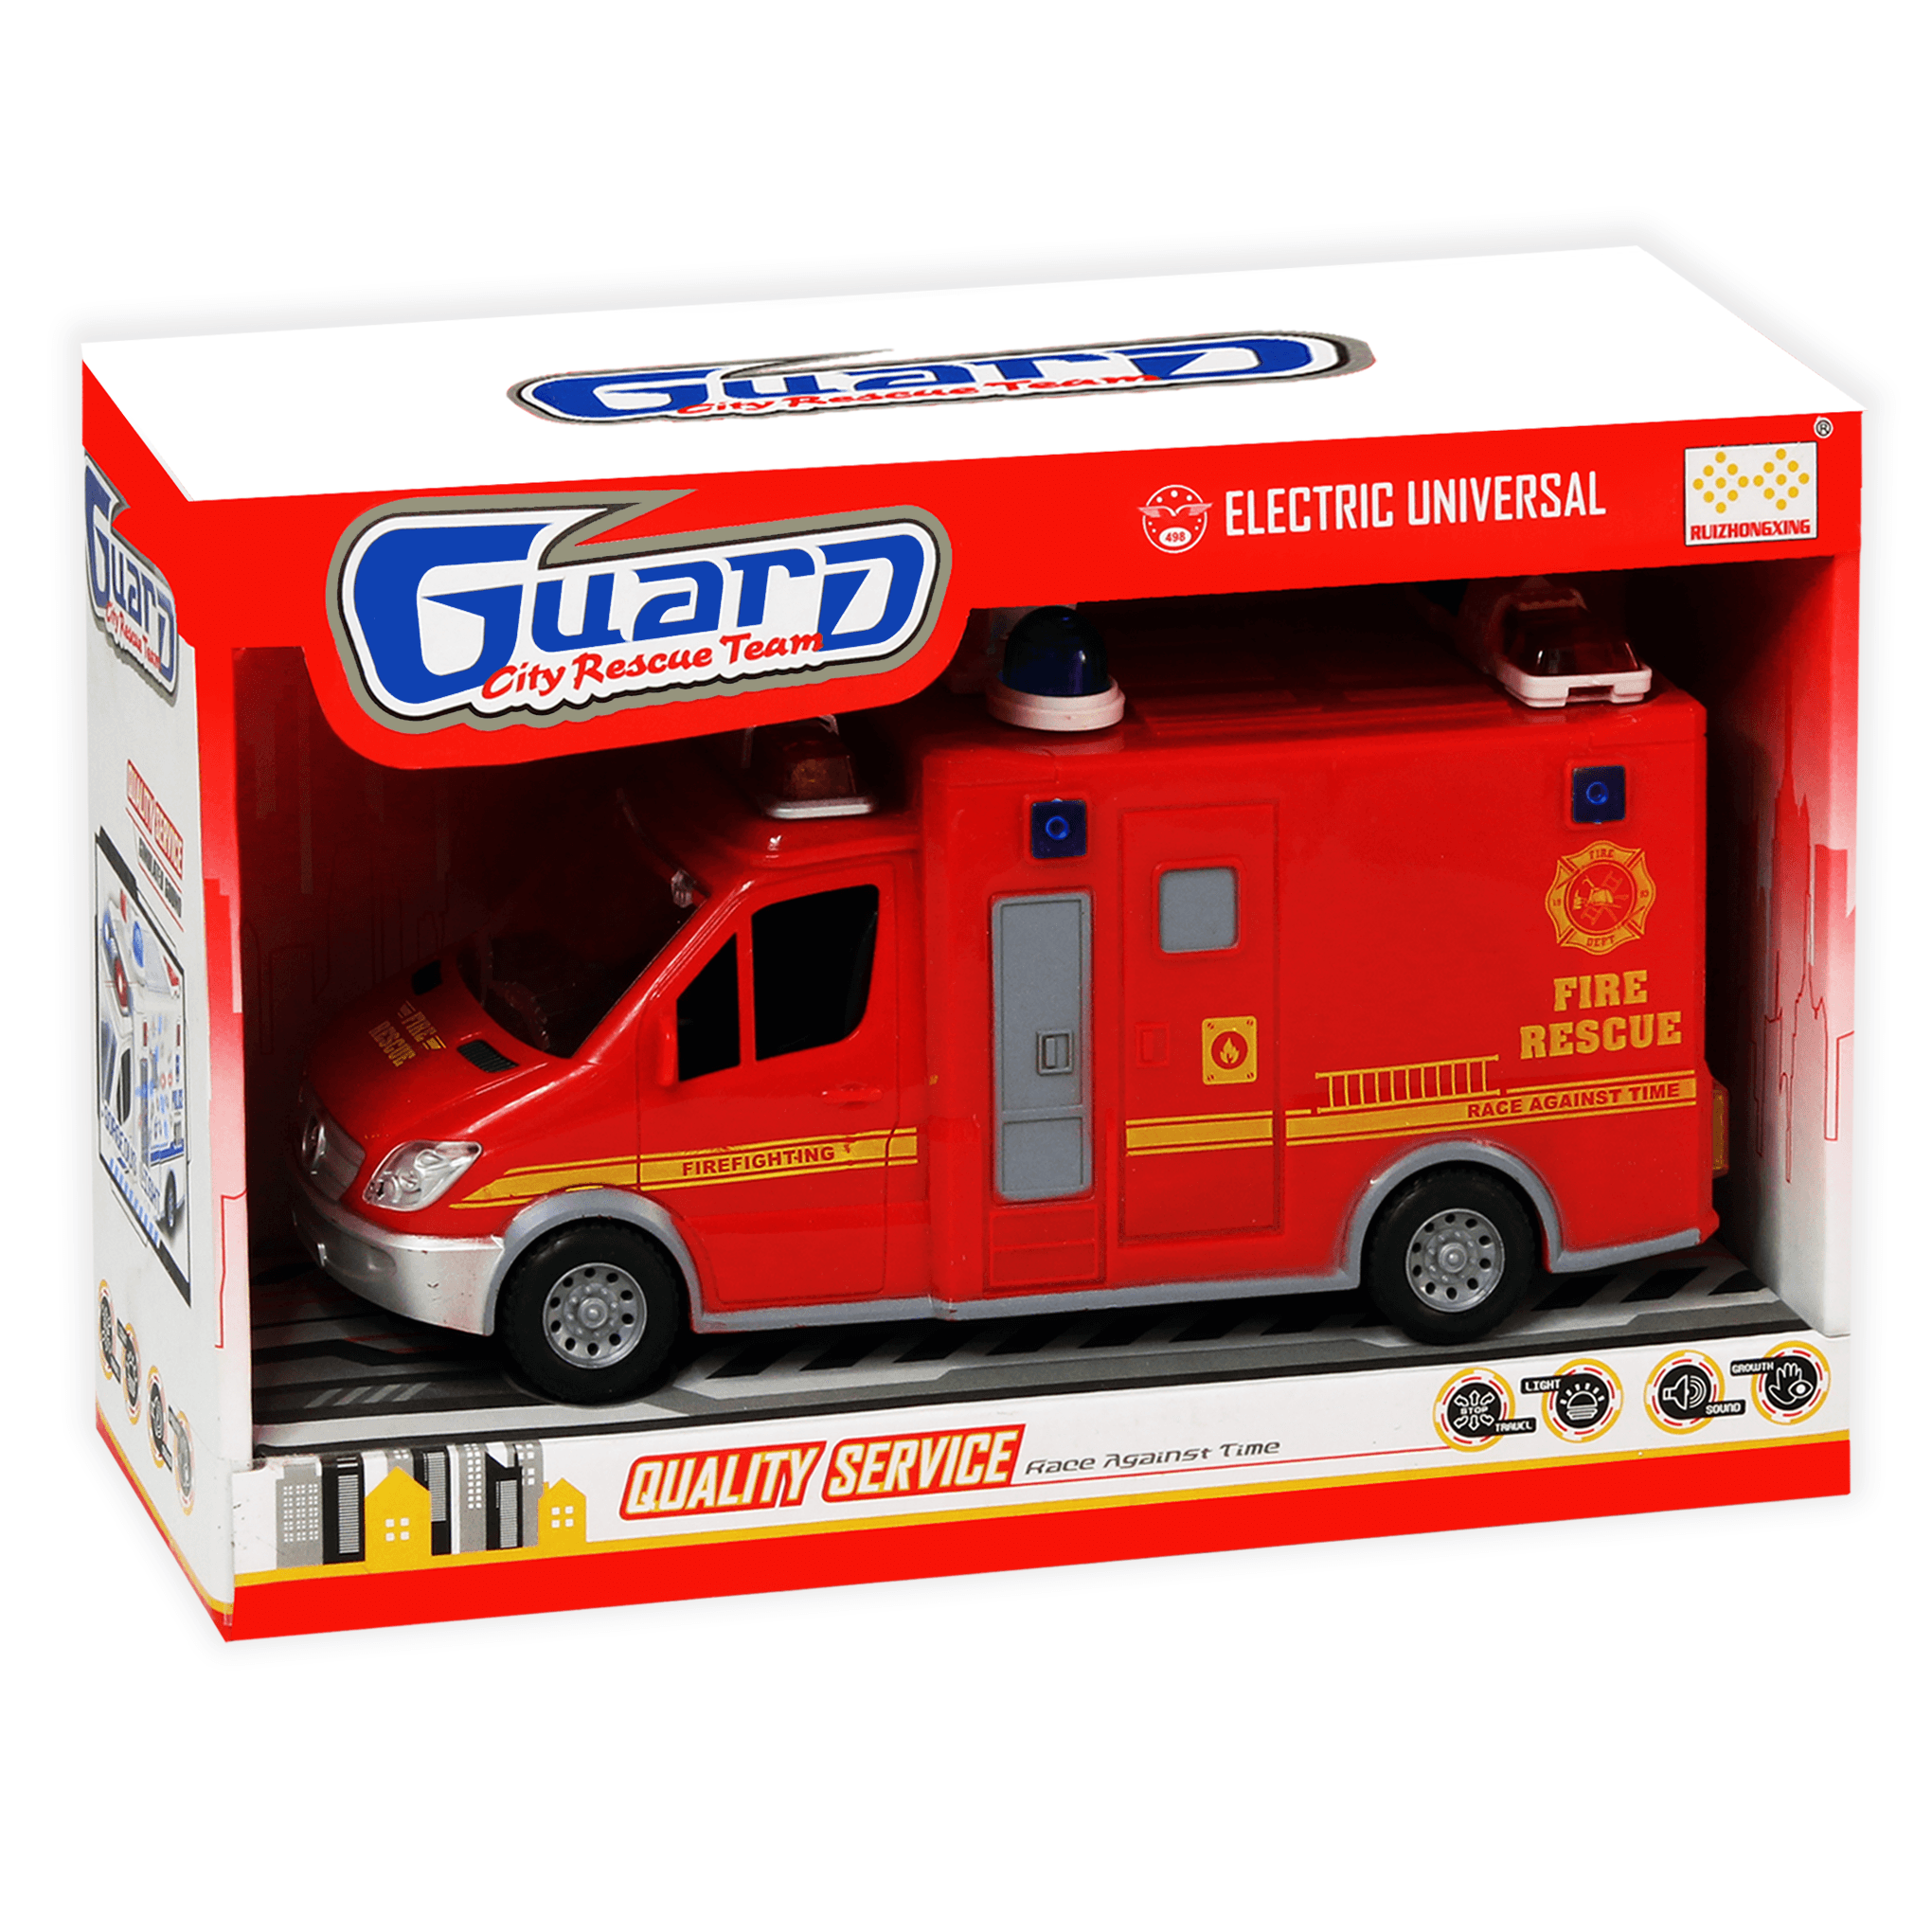 City Public Security DIY Fire Brigade Car - BumbleToys - 5-7 Years, Boys, Collectible Vehicles, Toy Land